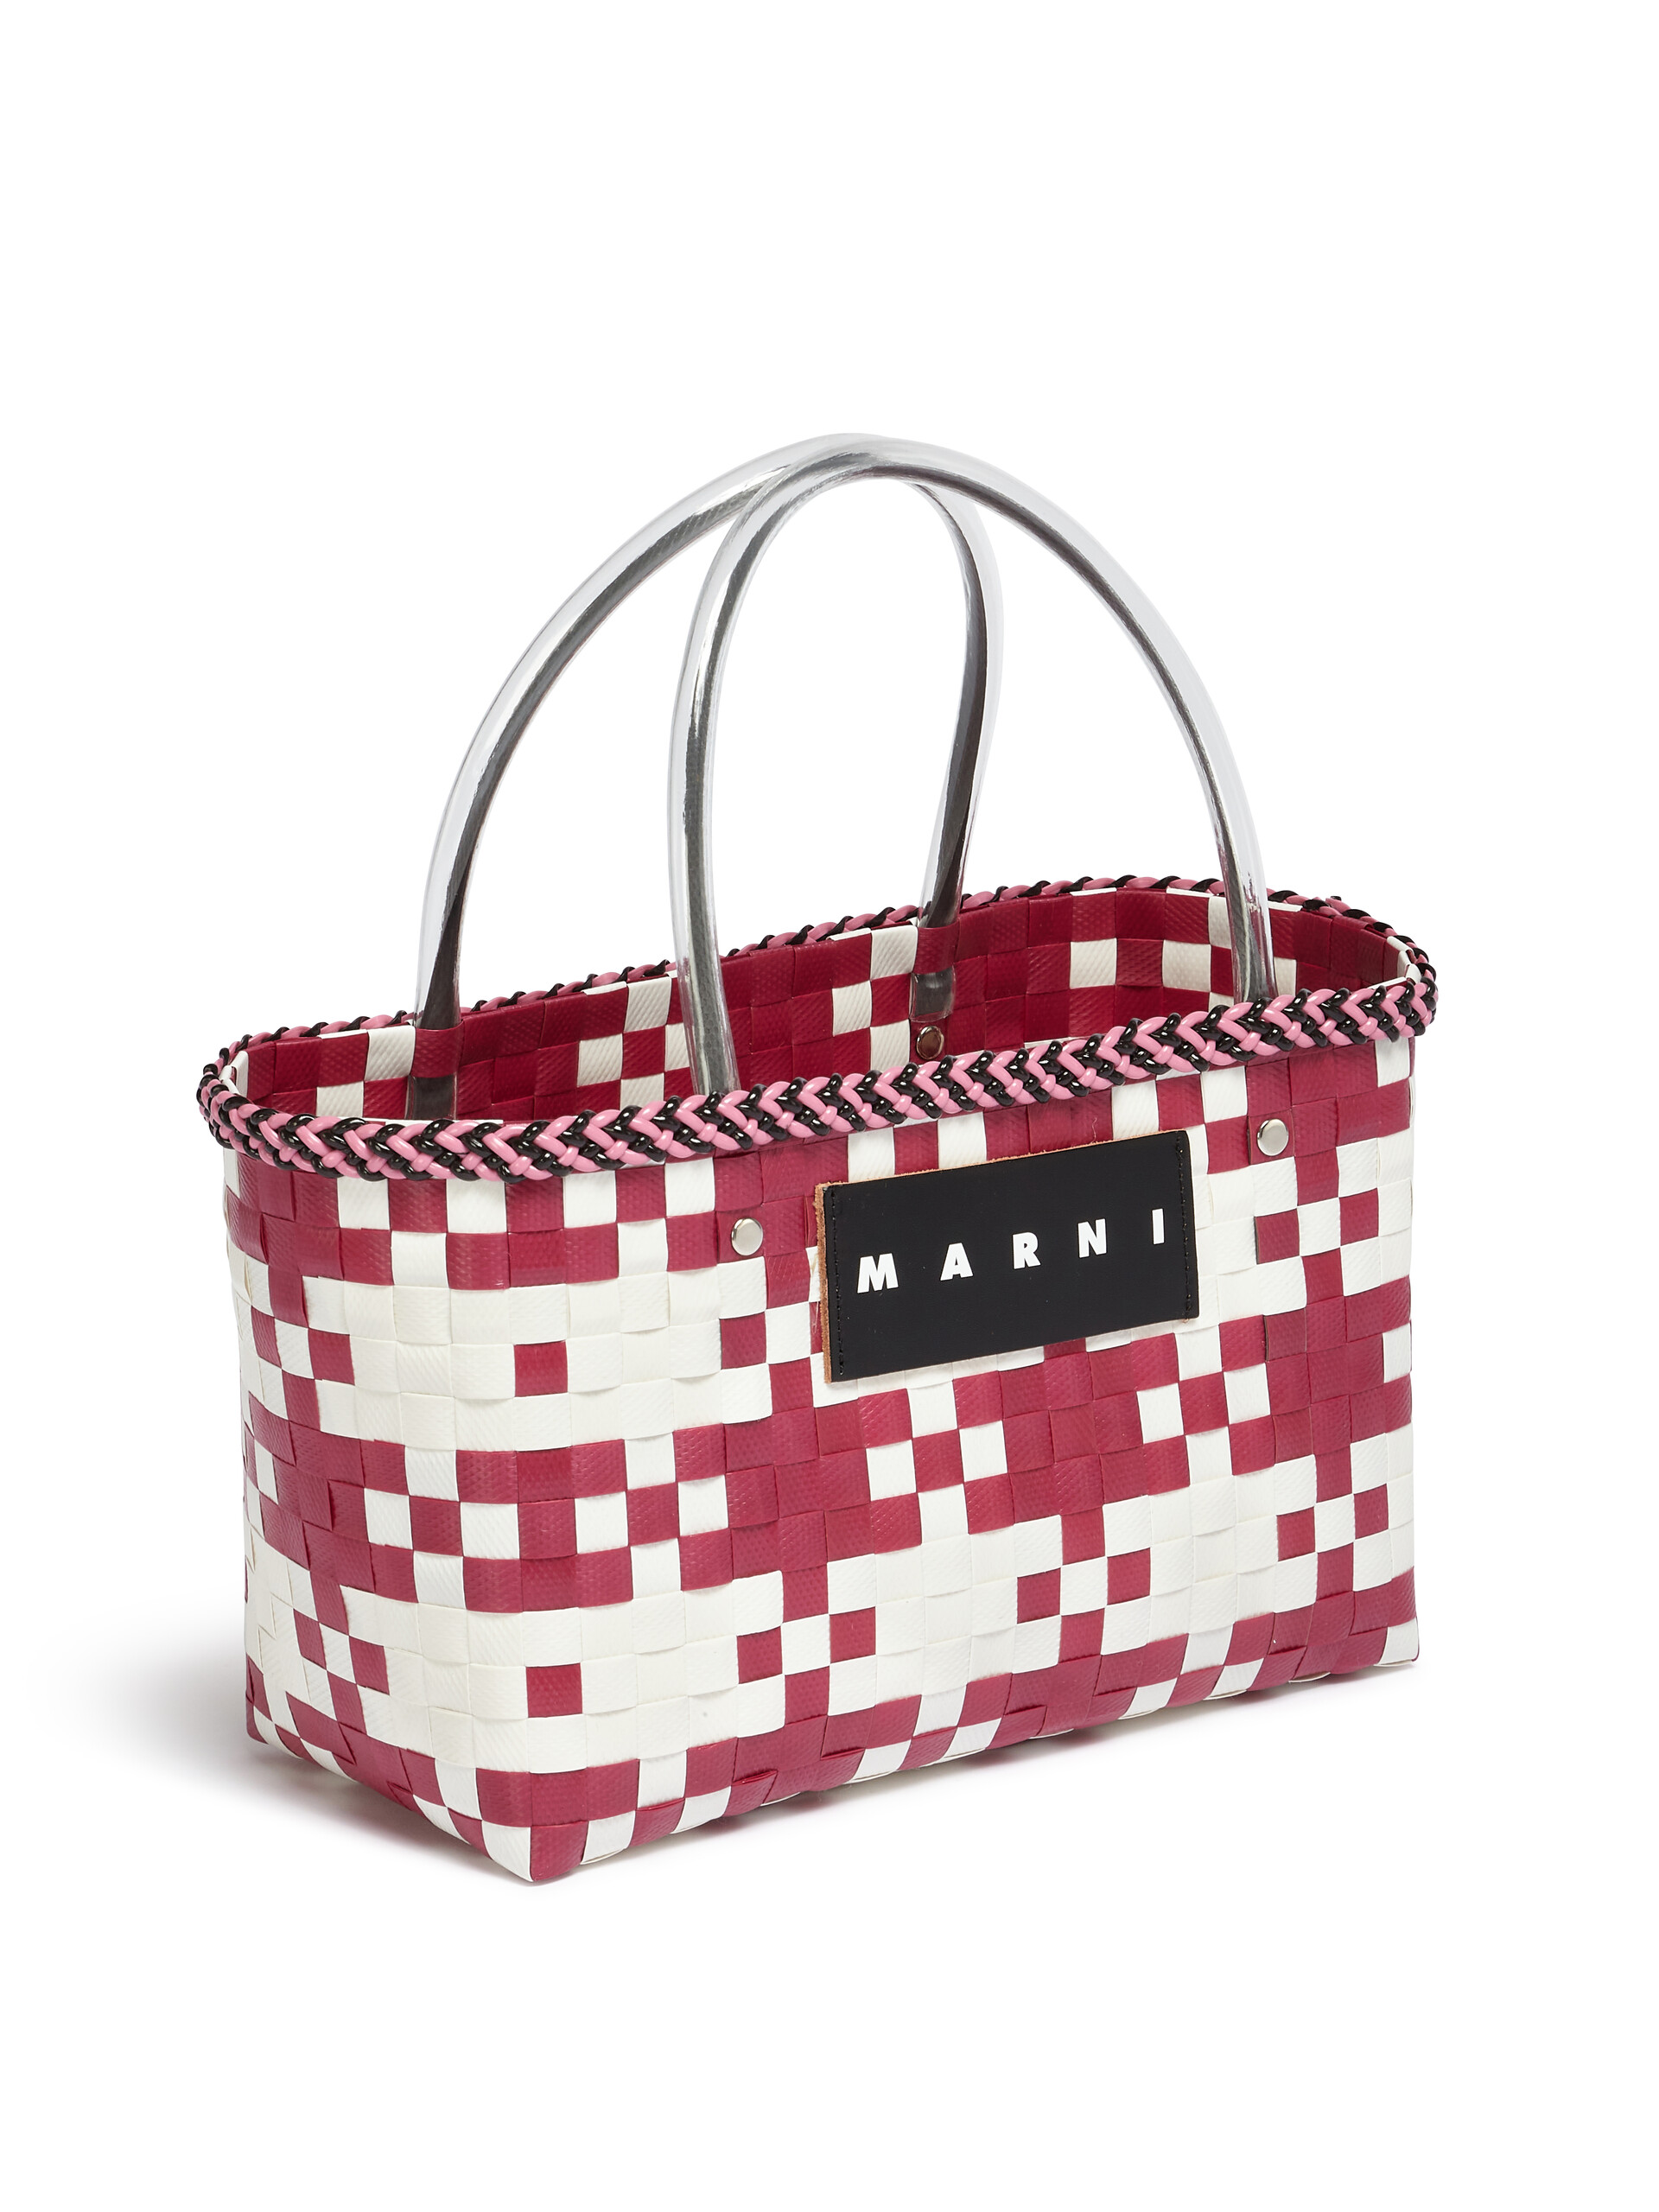 MARNI MARKET CHECK BAG in red and white tartan woven material - Shopping Bags - Image 4